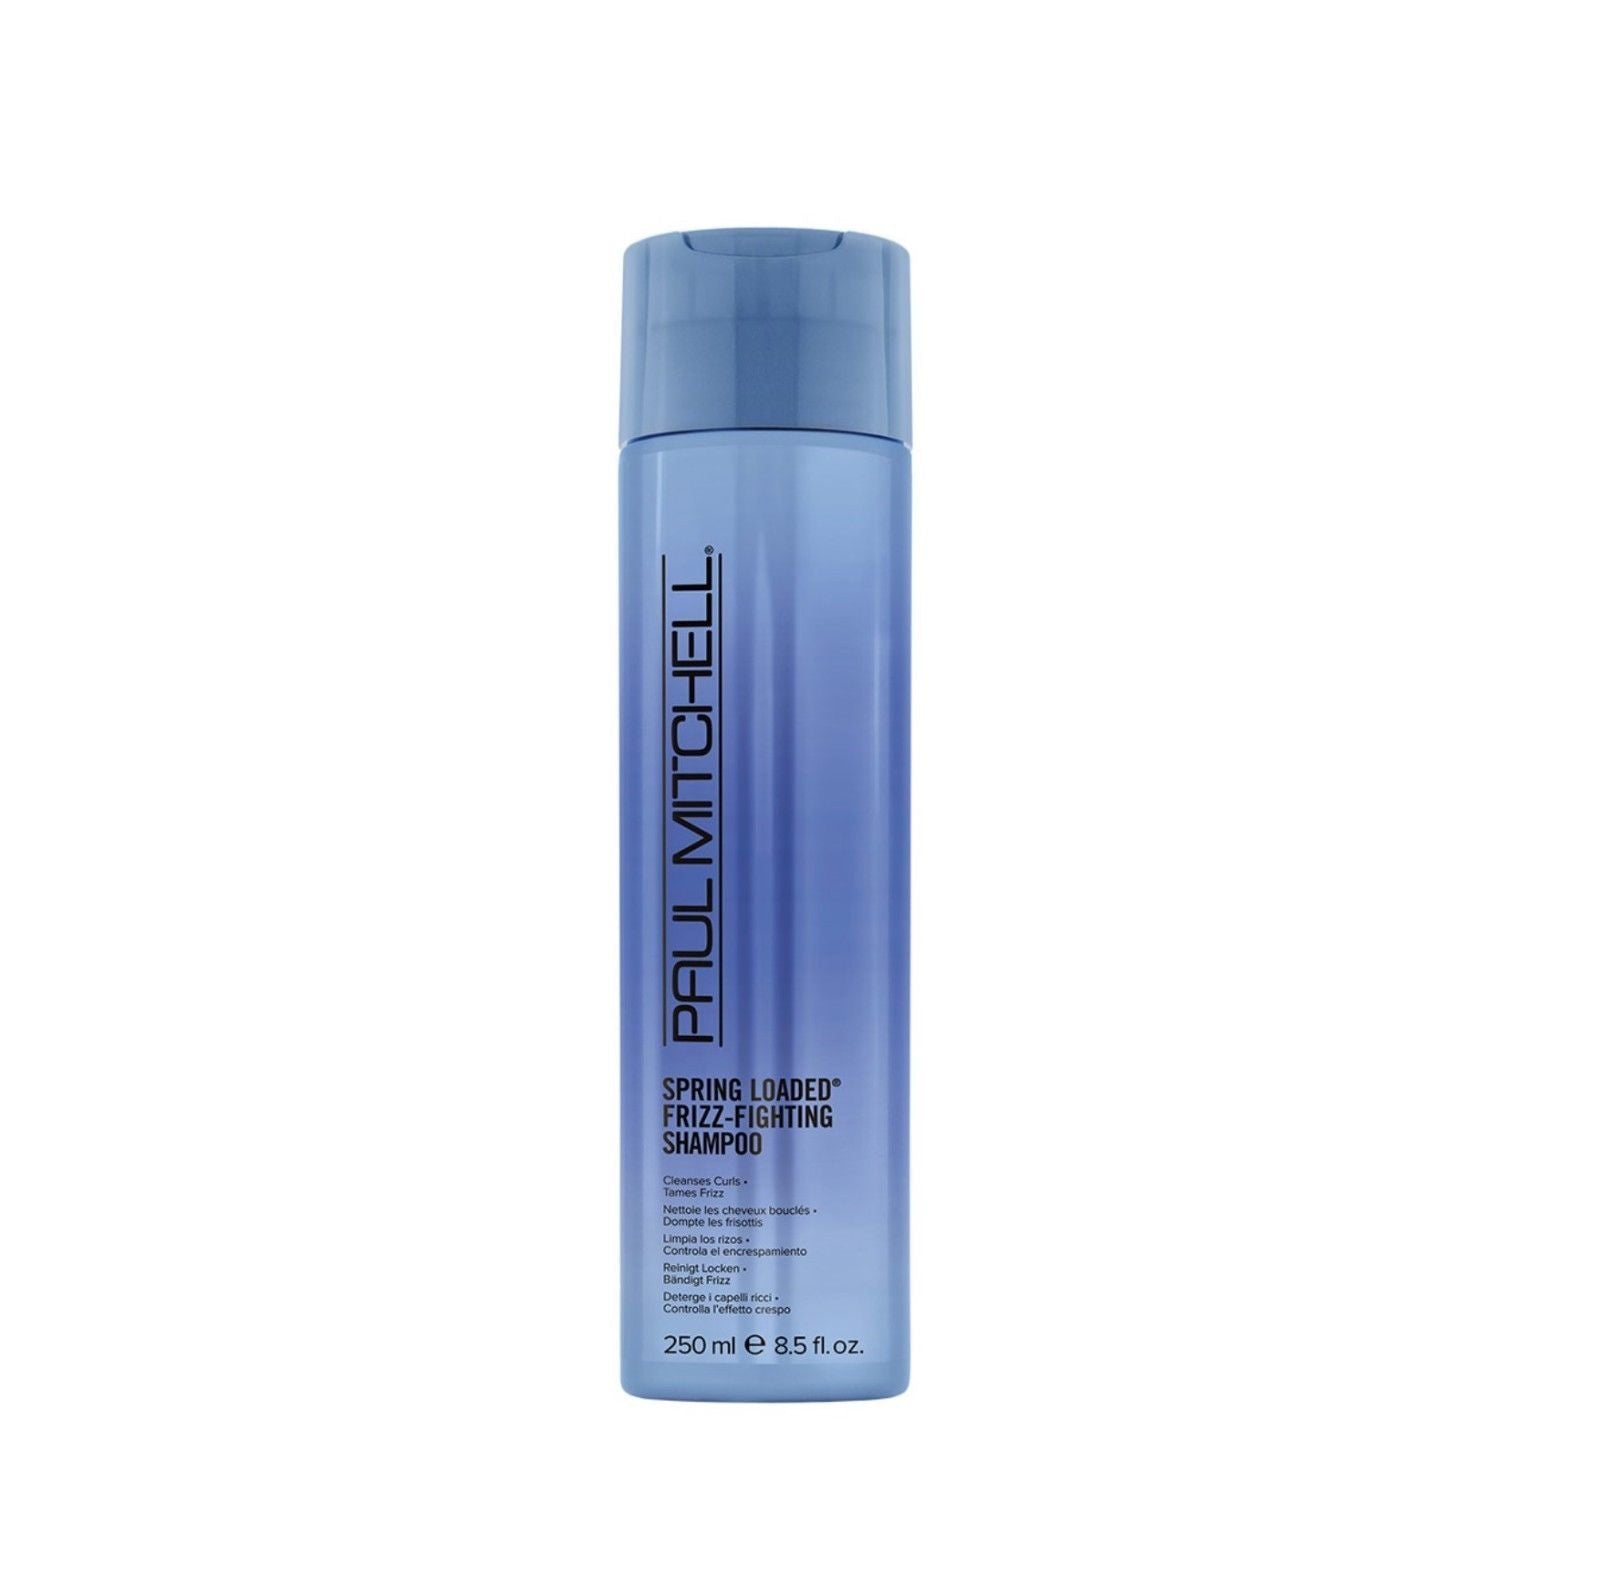 Paul Mitchell Spring Loaded Frizz-Fighting Tames Frizz Shampoo 250ml - On Line Hair Depot